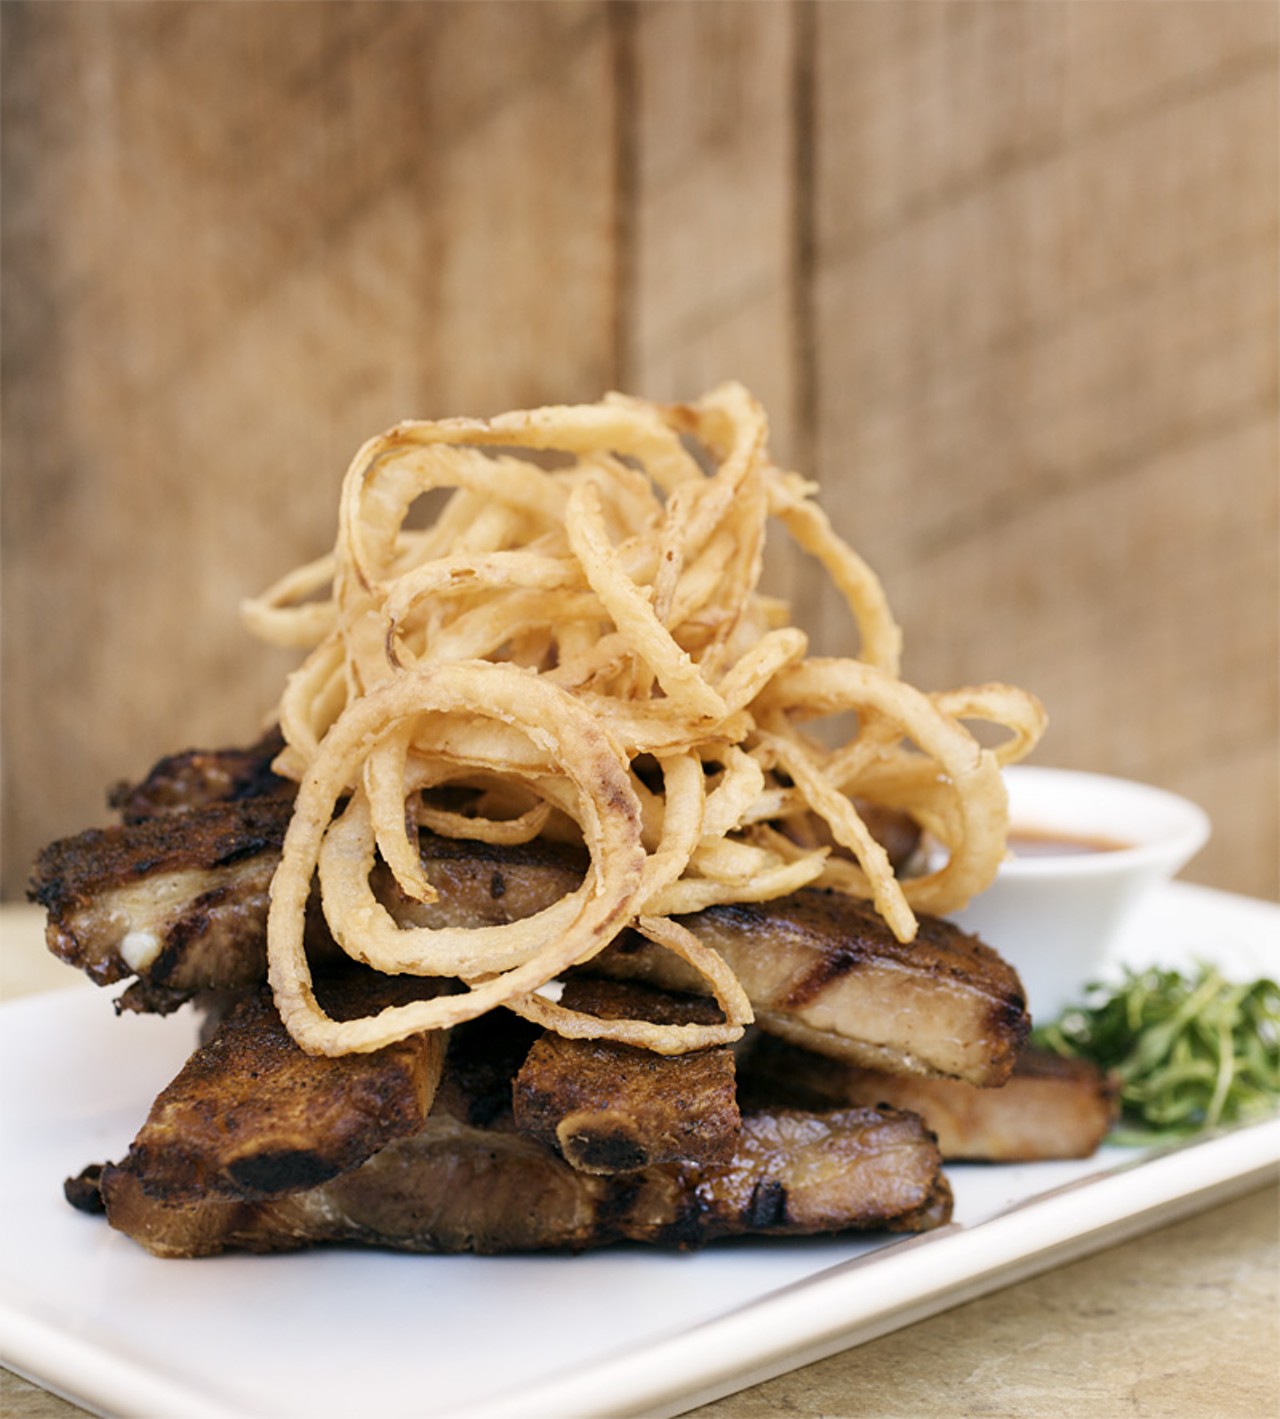 This impressively sized appetizer is the Smoked Spare Ribs served with a tangy bbq sauce and tobacco onions.